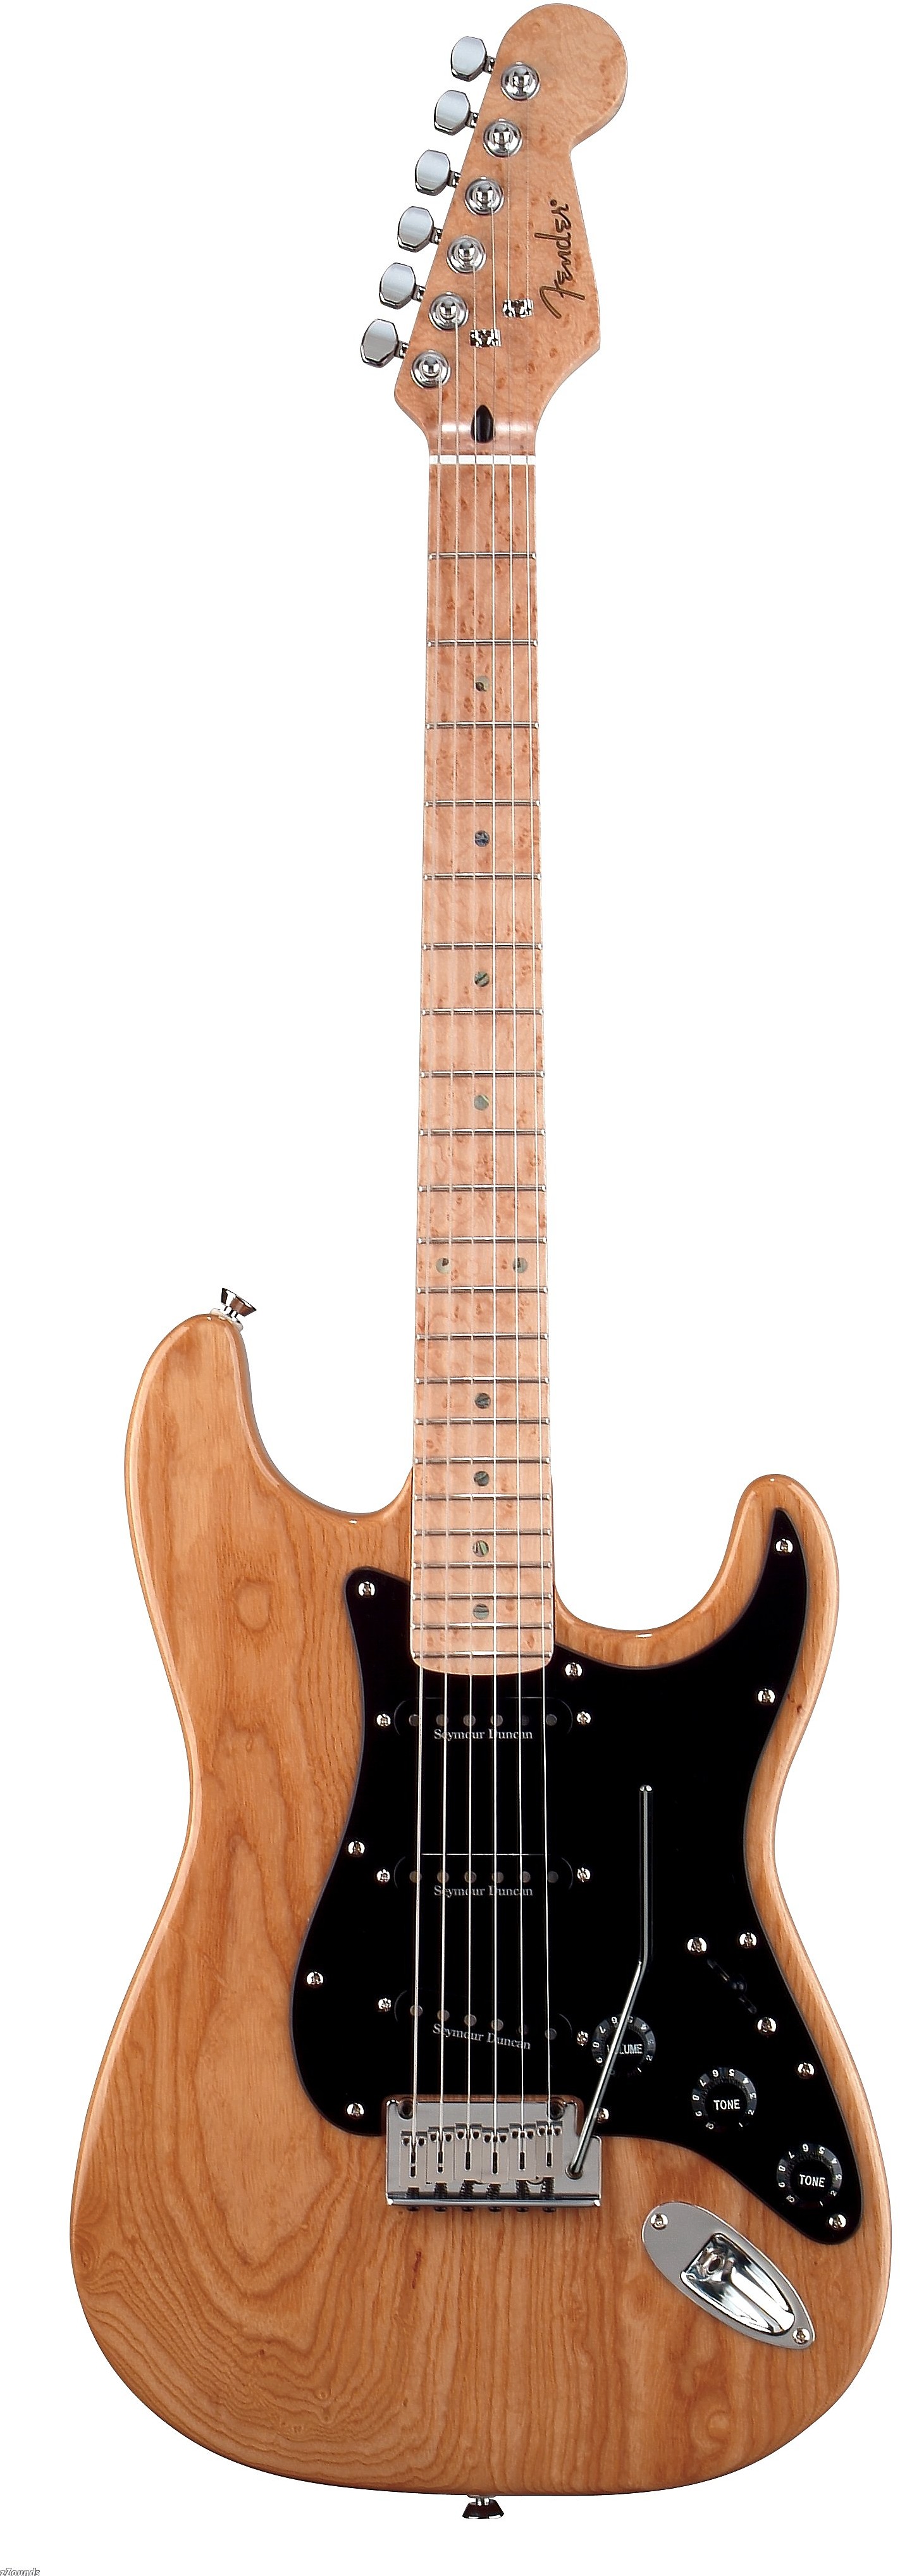 Special Edition Lite Ash Stratocaster by Fender